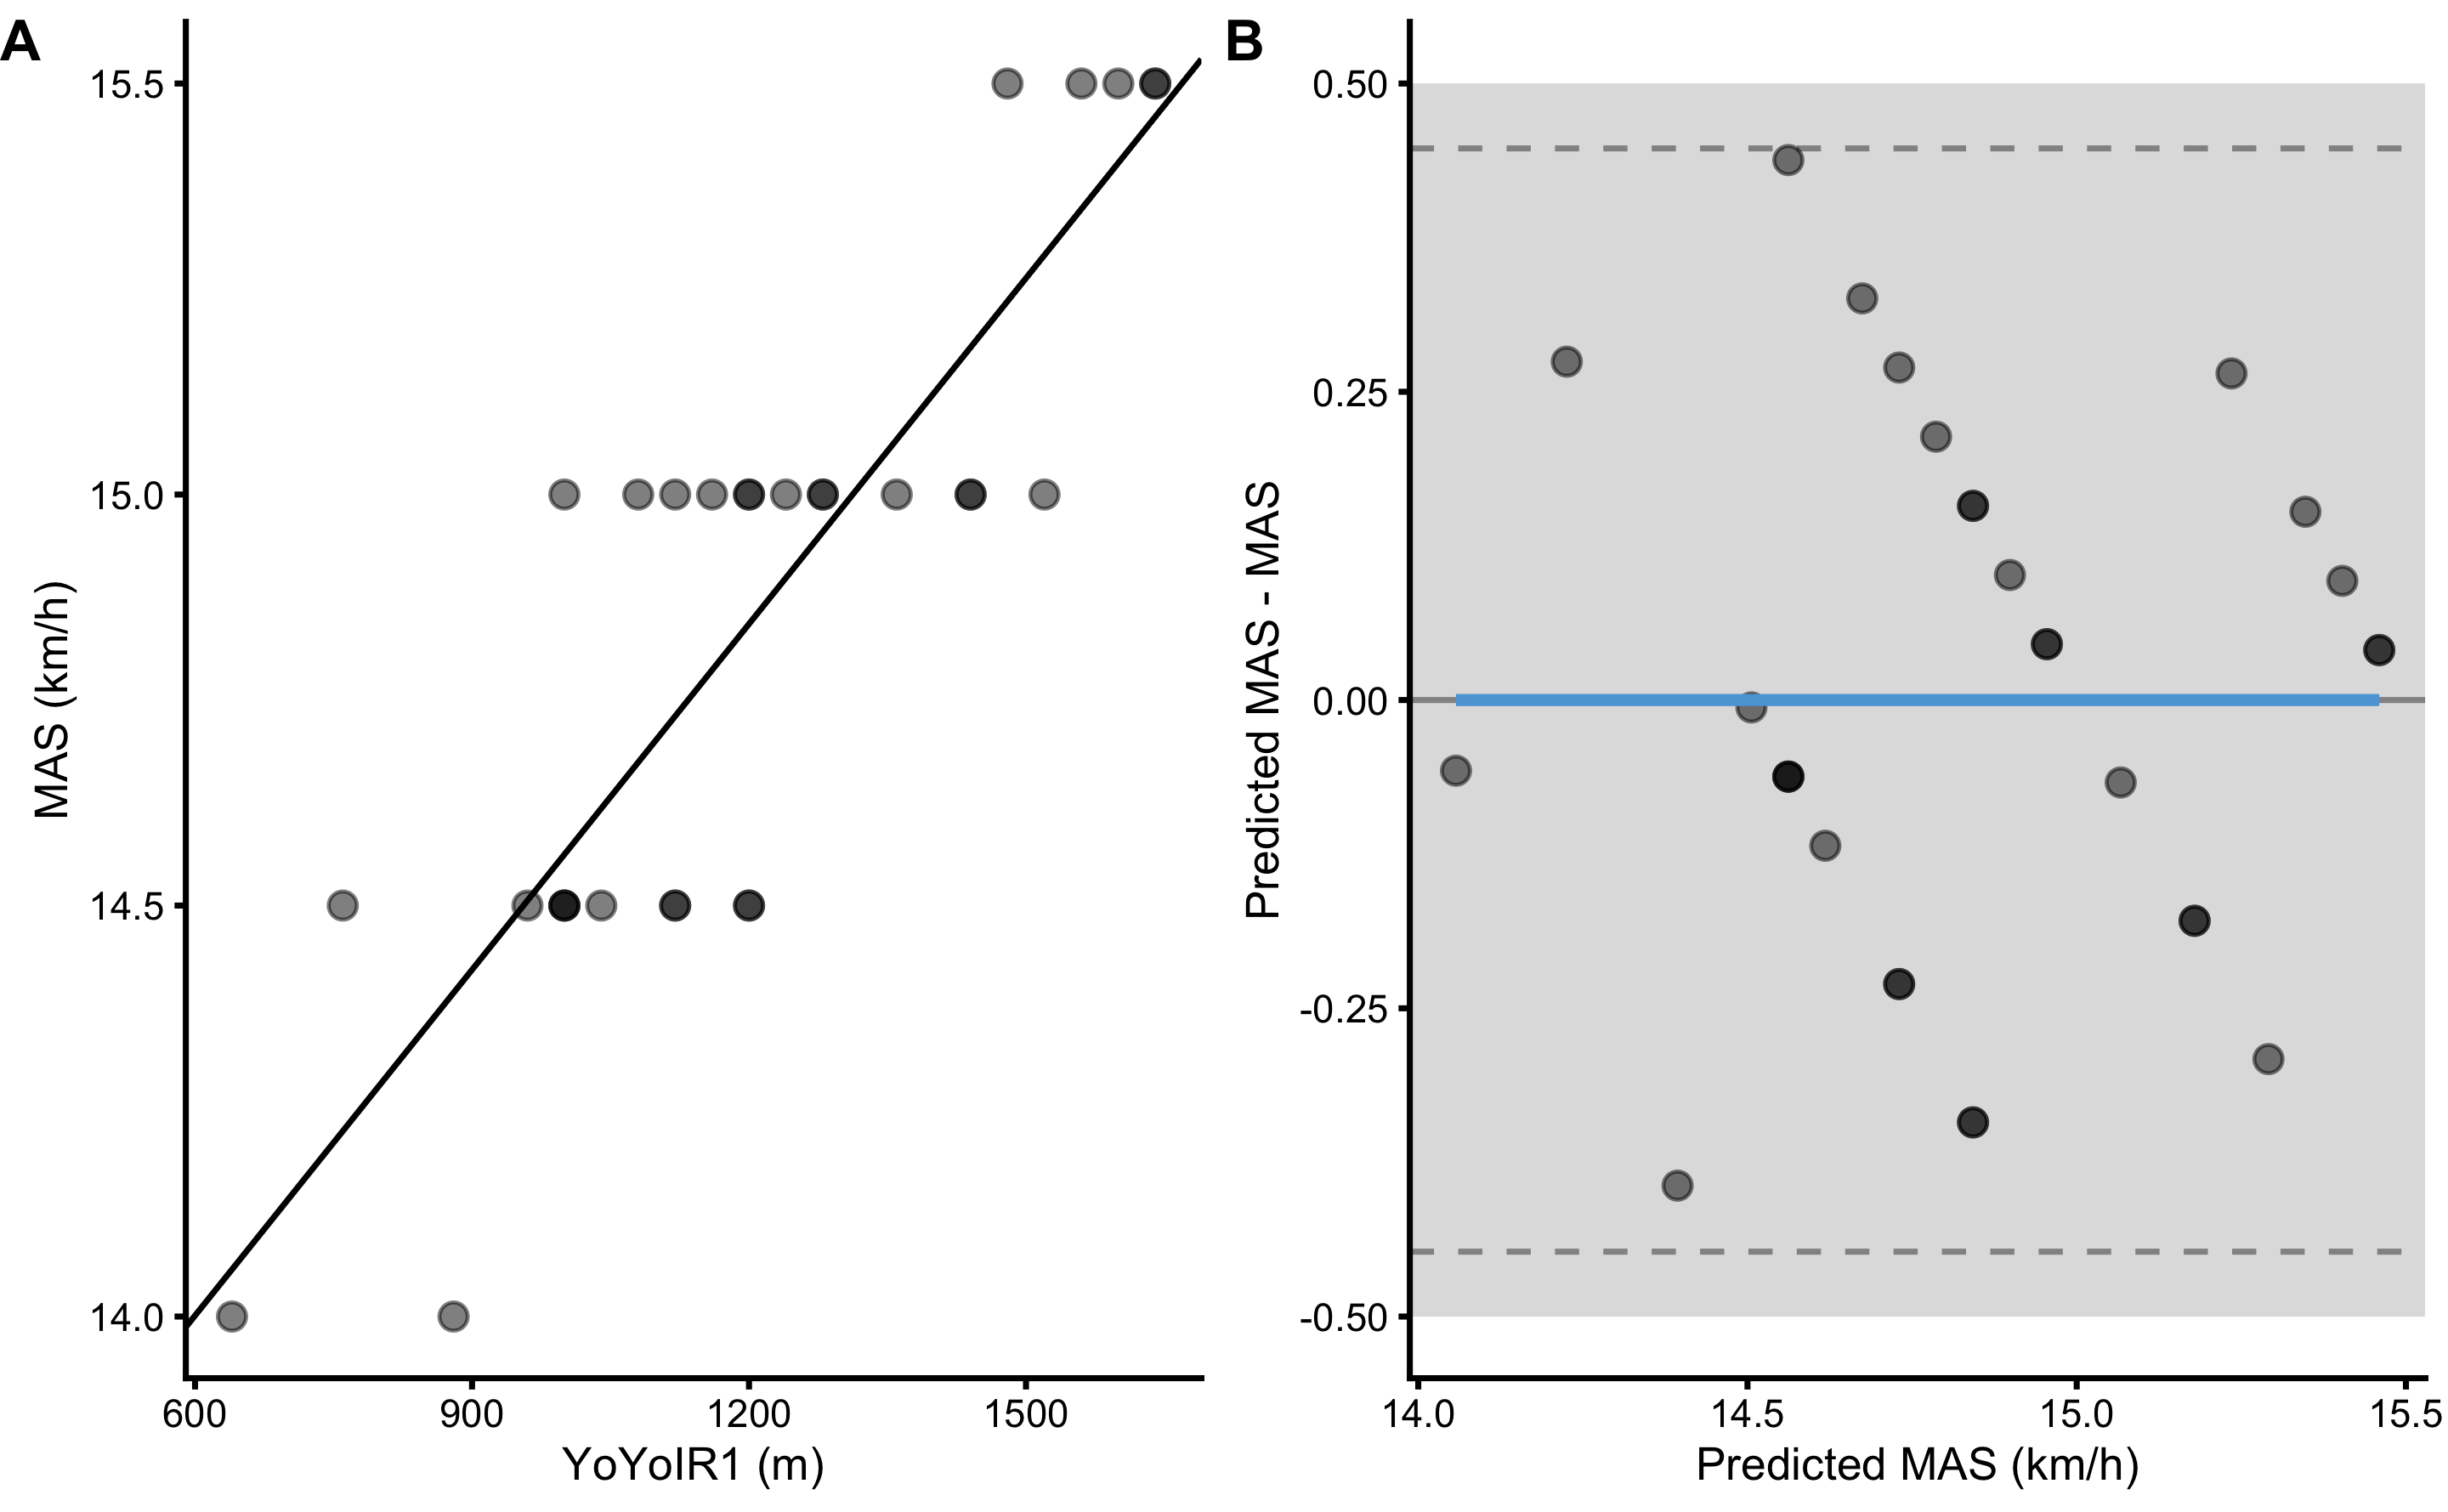 Scatter plot for simple linear regression between MAS and YoYoIR1 using the full training data sample. A. Scatter plot between MAS and YoYoIR1 scores. Black line indicates model prediction. B. Scatter plot between \(y_{predicted}\) (fitted or predicted MAS) against model residual \(y_{residual} = y_{predicted} - y_{observed}\), or Predicted MAS - MAS. Dotted lines indicate Levels of Agreement (LOA; i.e. upper and lower threshold that contain 95% of residuals distribution) and grey band indicates SESOI. Blue line indicate linear regression fit of the residuals and is used to indicate issues with the model (residuals)